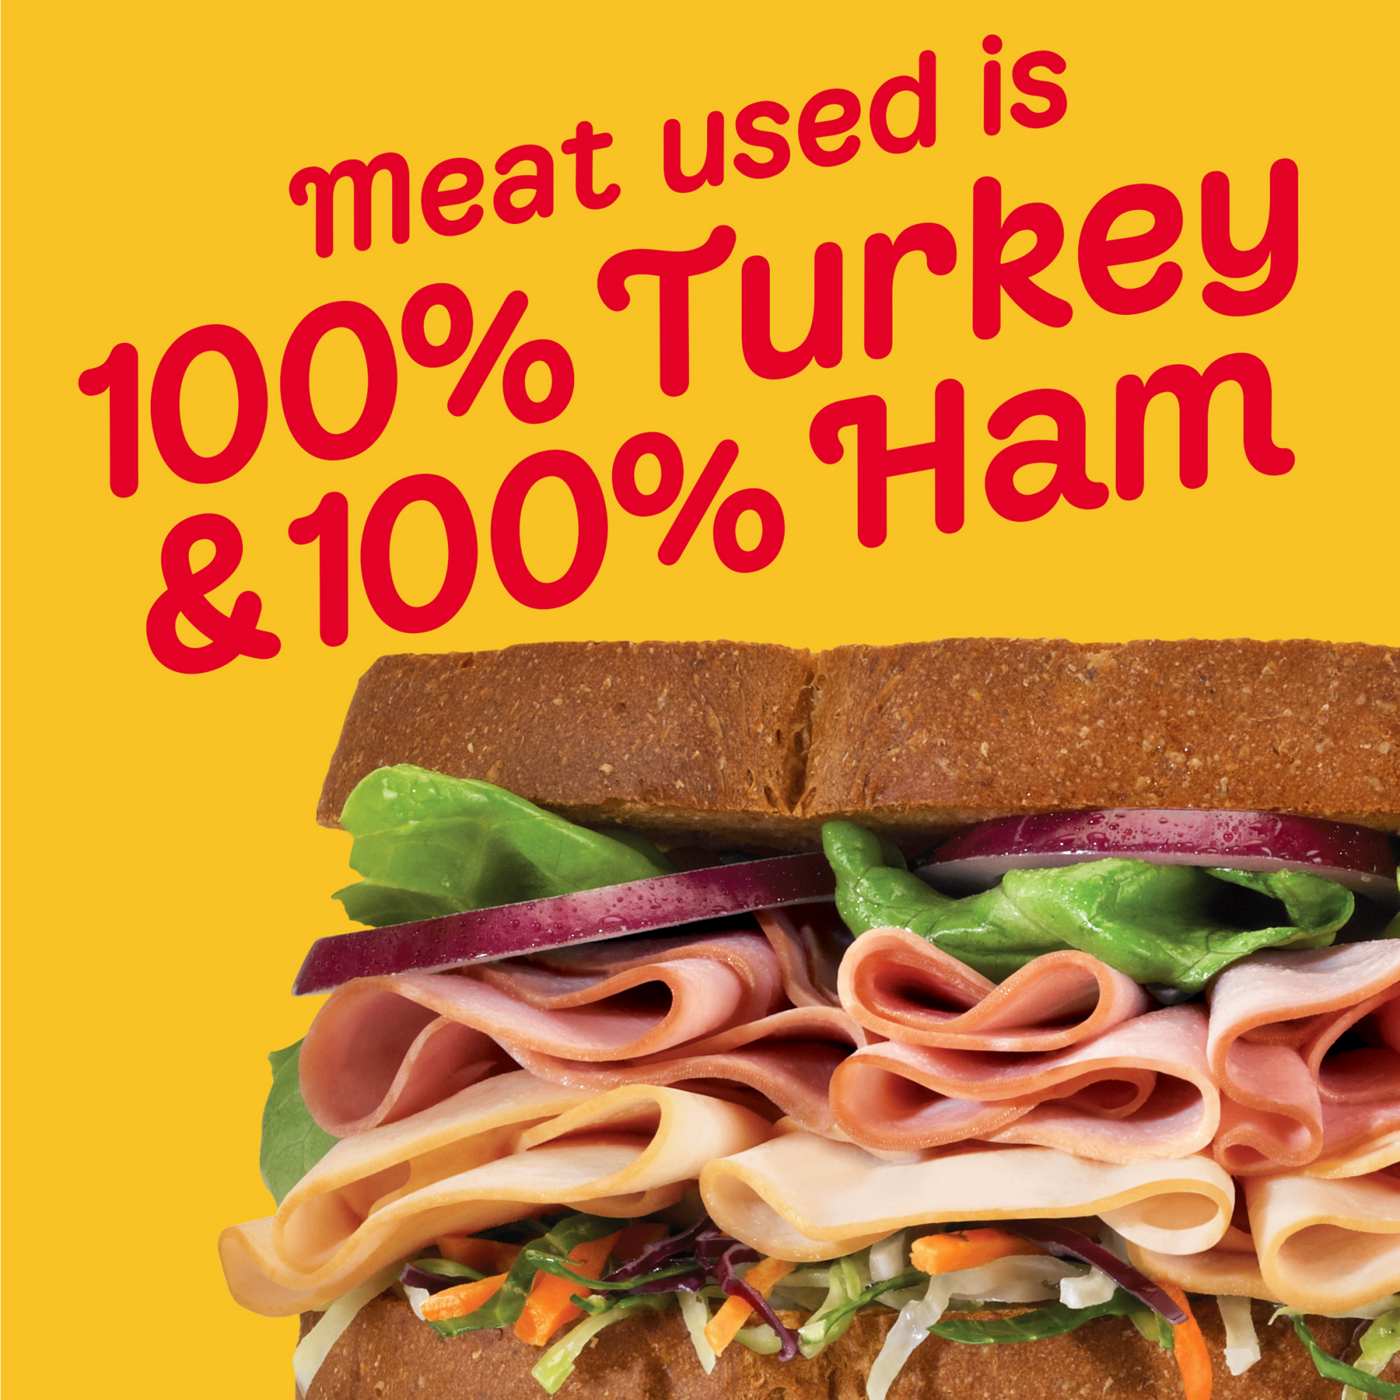 Oscar Mayer Deli Fresh Oven Roasted Turkey Breast & Smoked Uncured Sliced Ham Lunch Meats - Family Pack; image 6 of 6